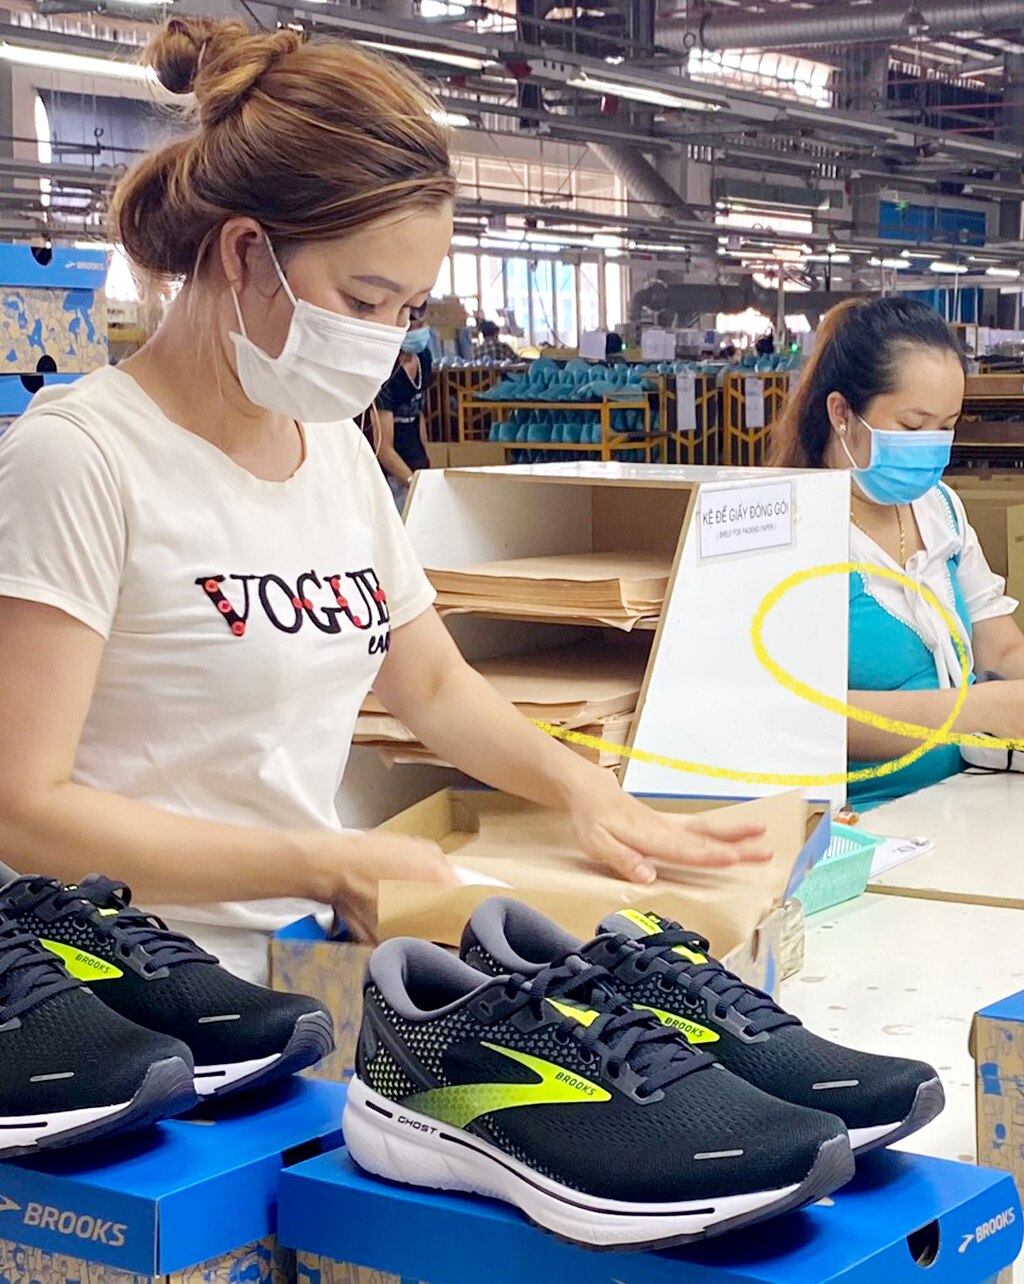 Women working on packaging Brooks shoes